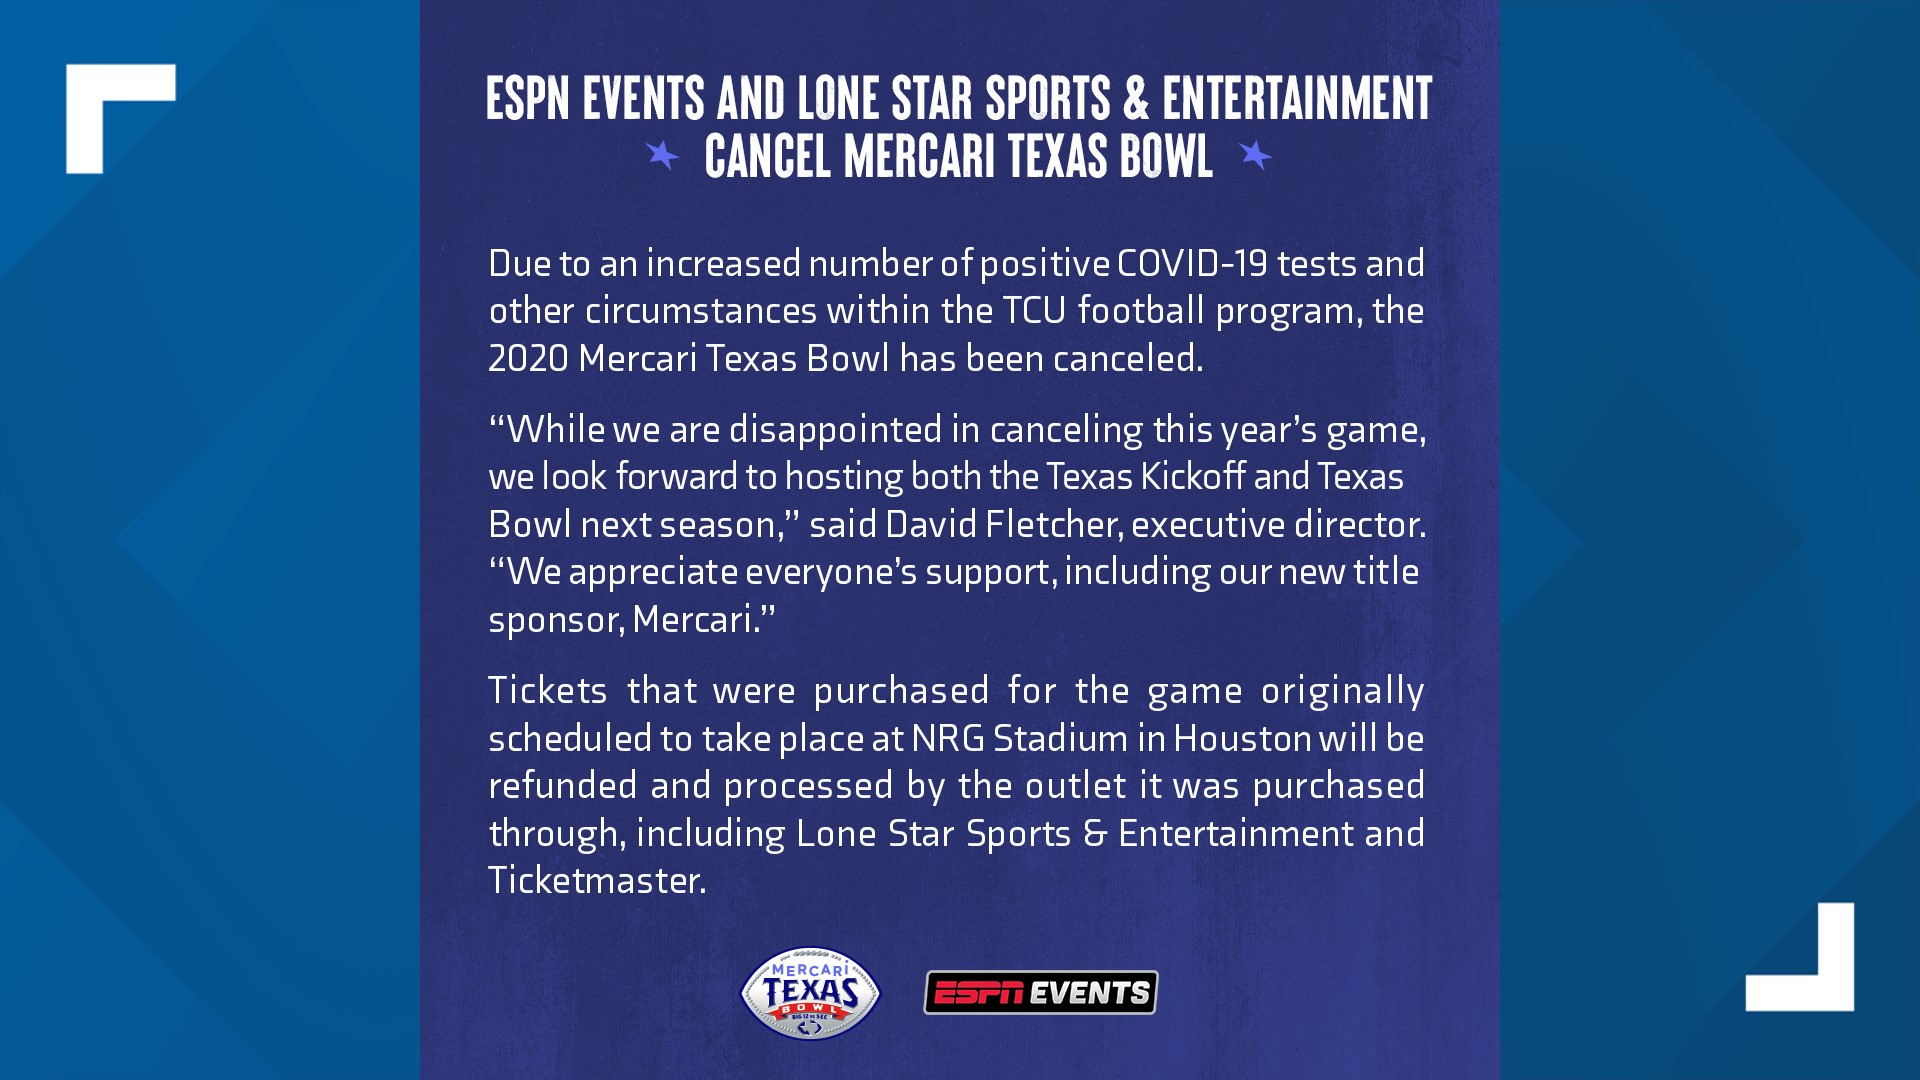 Mercari Texas Bowl cancelled, tickets to be refunded